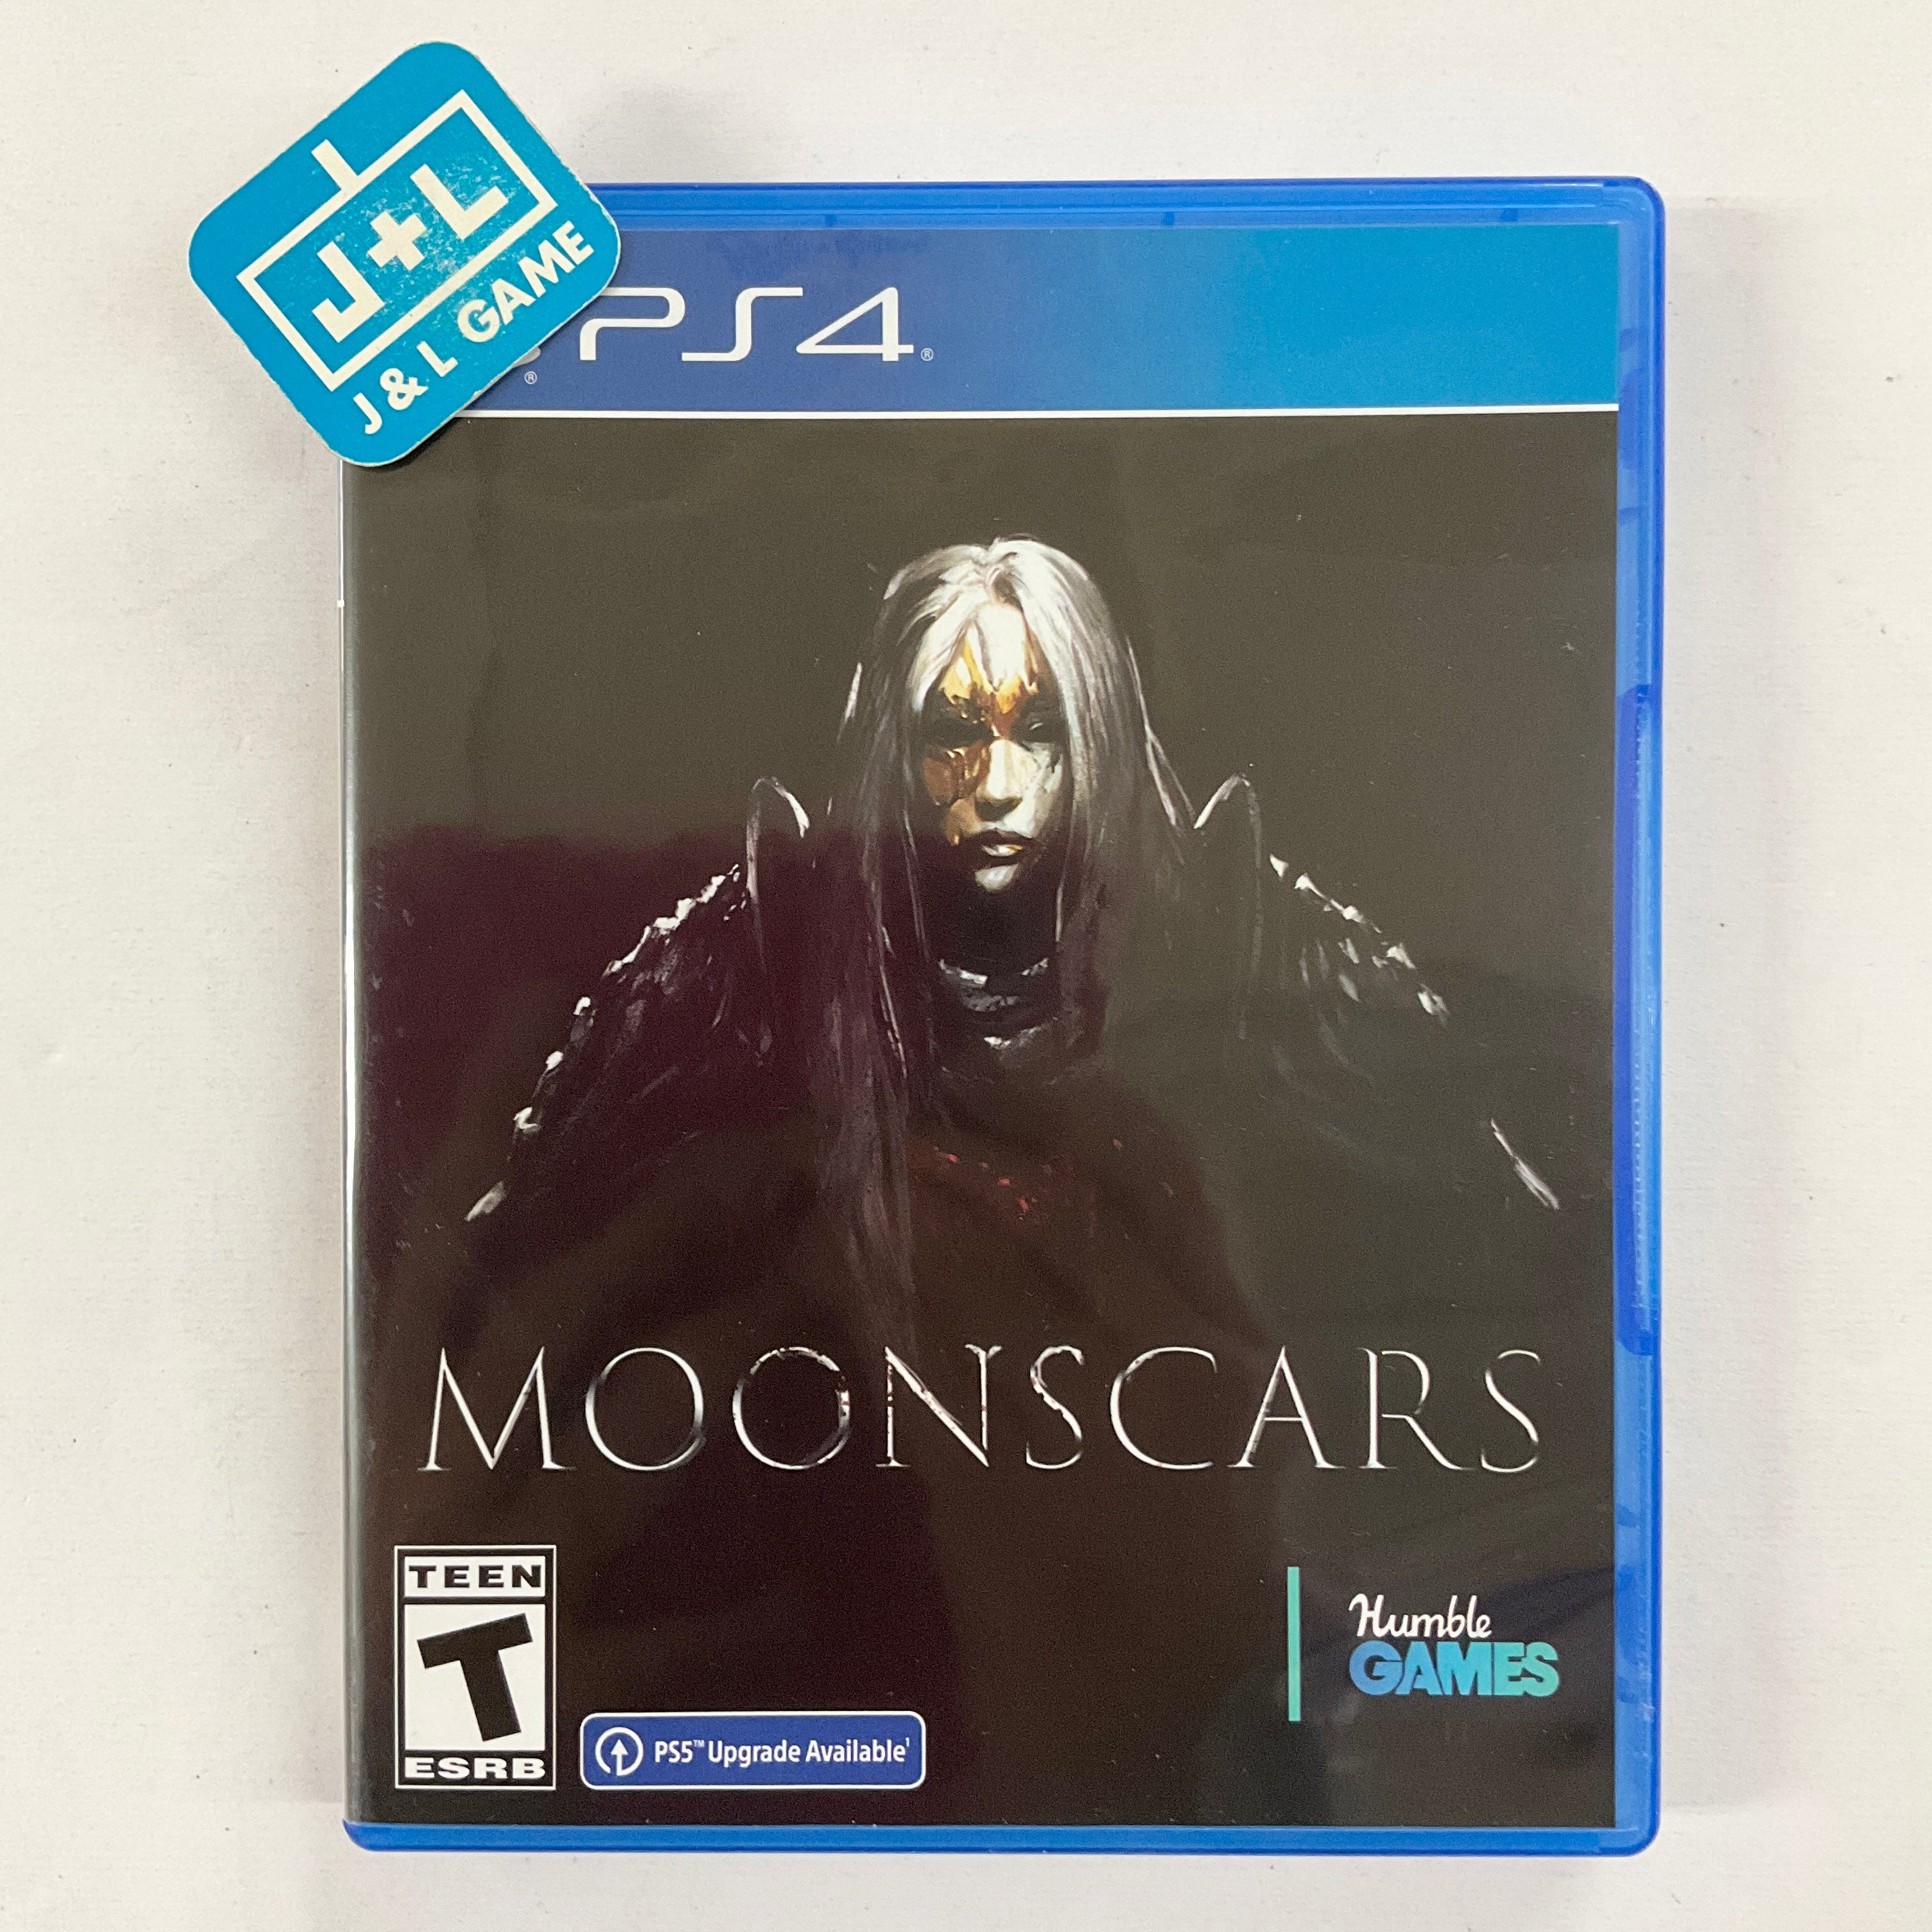 Moonscars - (PS4) PlayStation 4 [Pre-Owned] Video Games Humble Games   